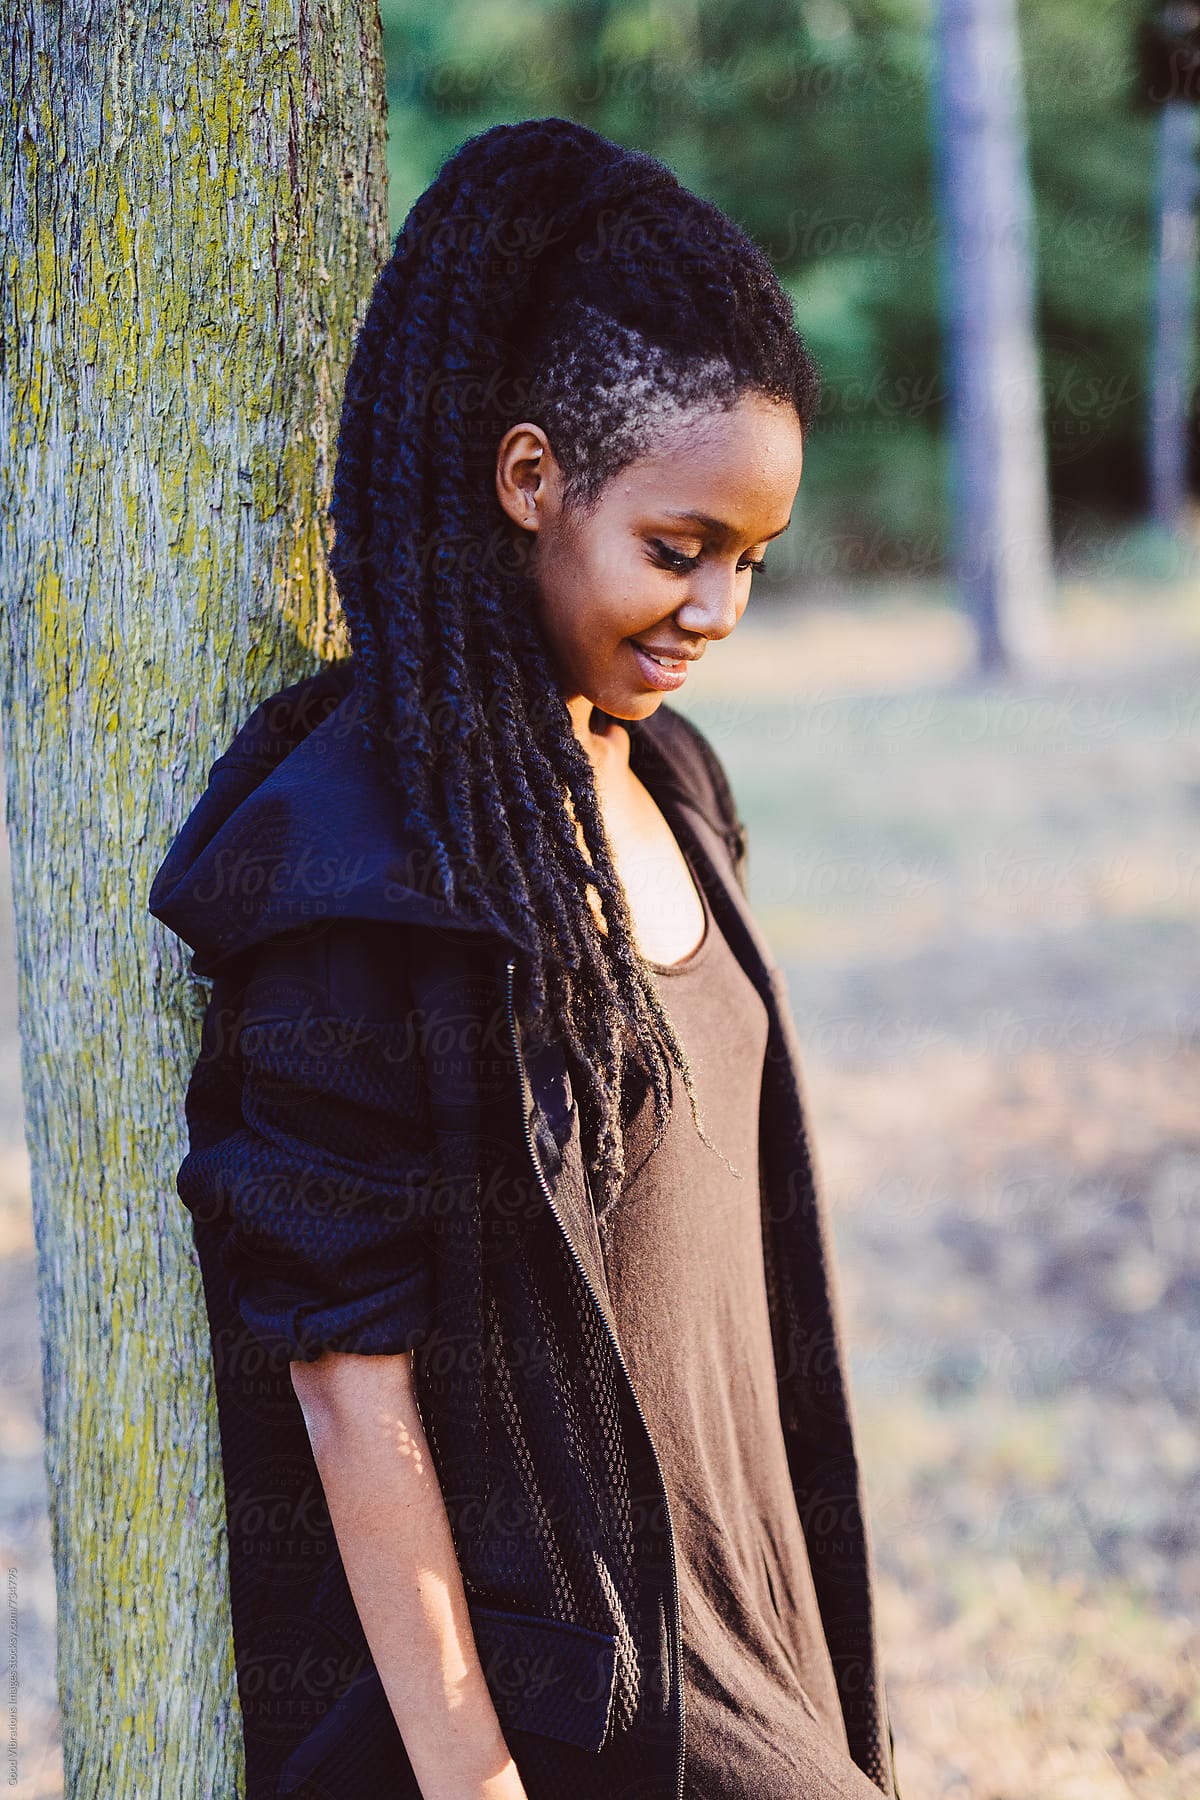 Rasta Woman With Dreadlocks Posing In The Nature At Sunset